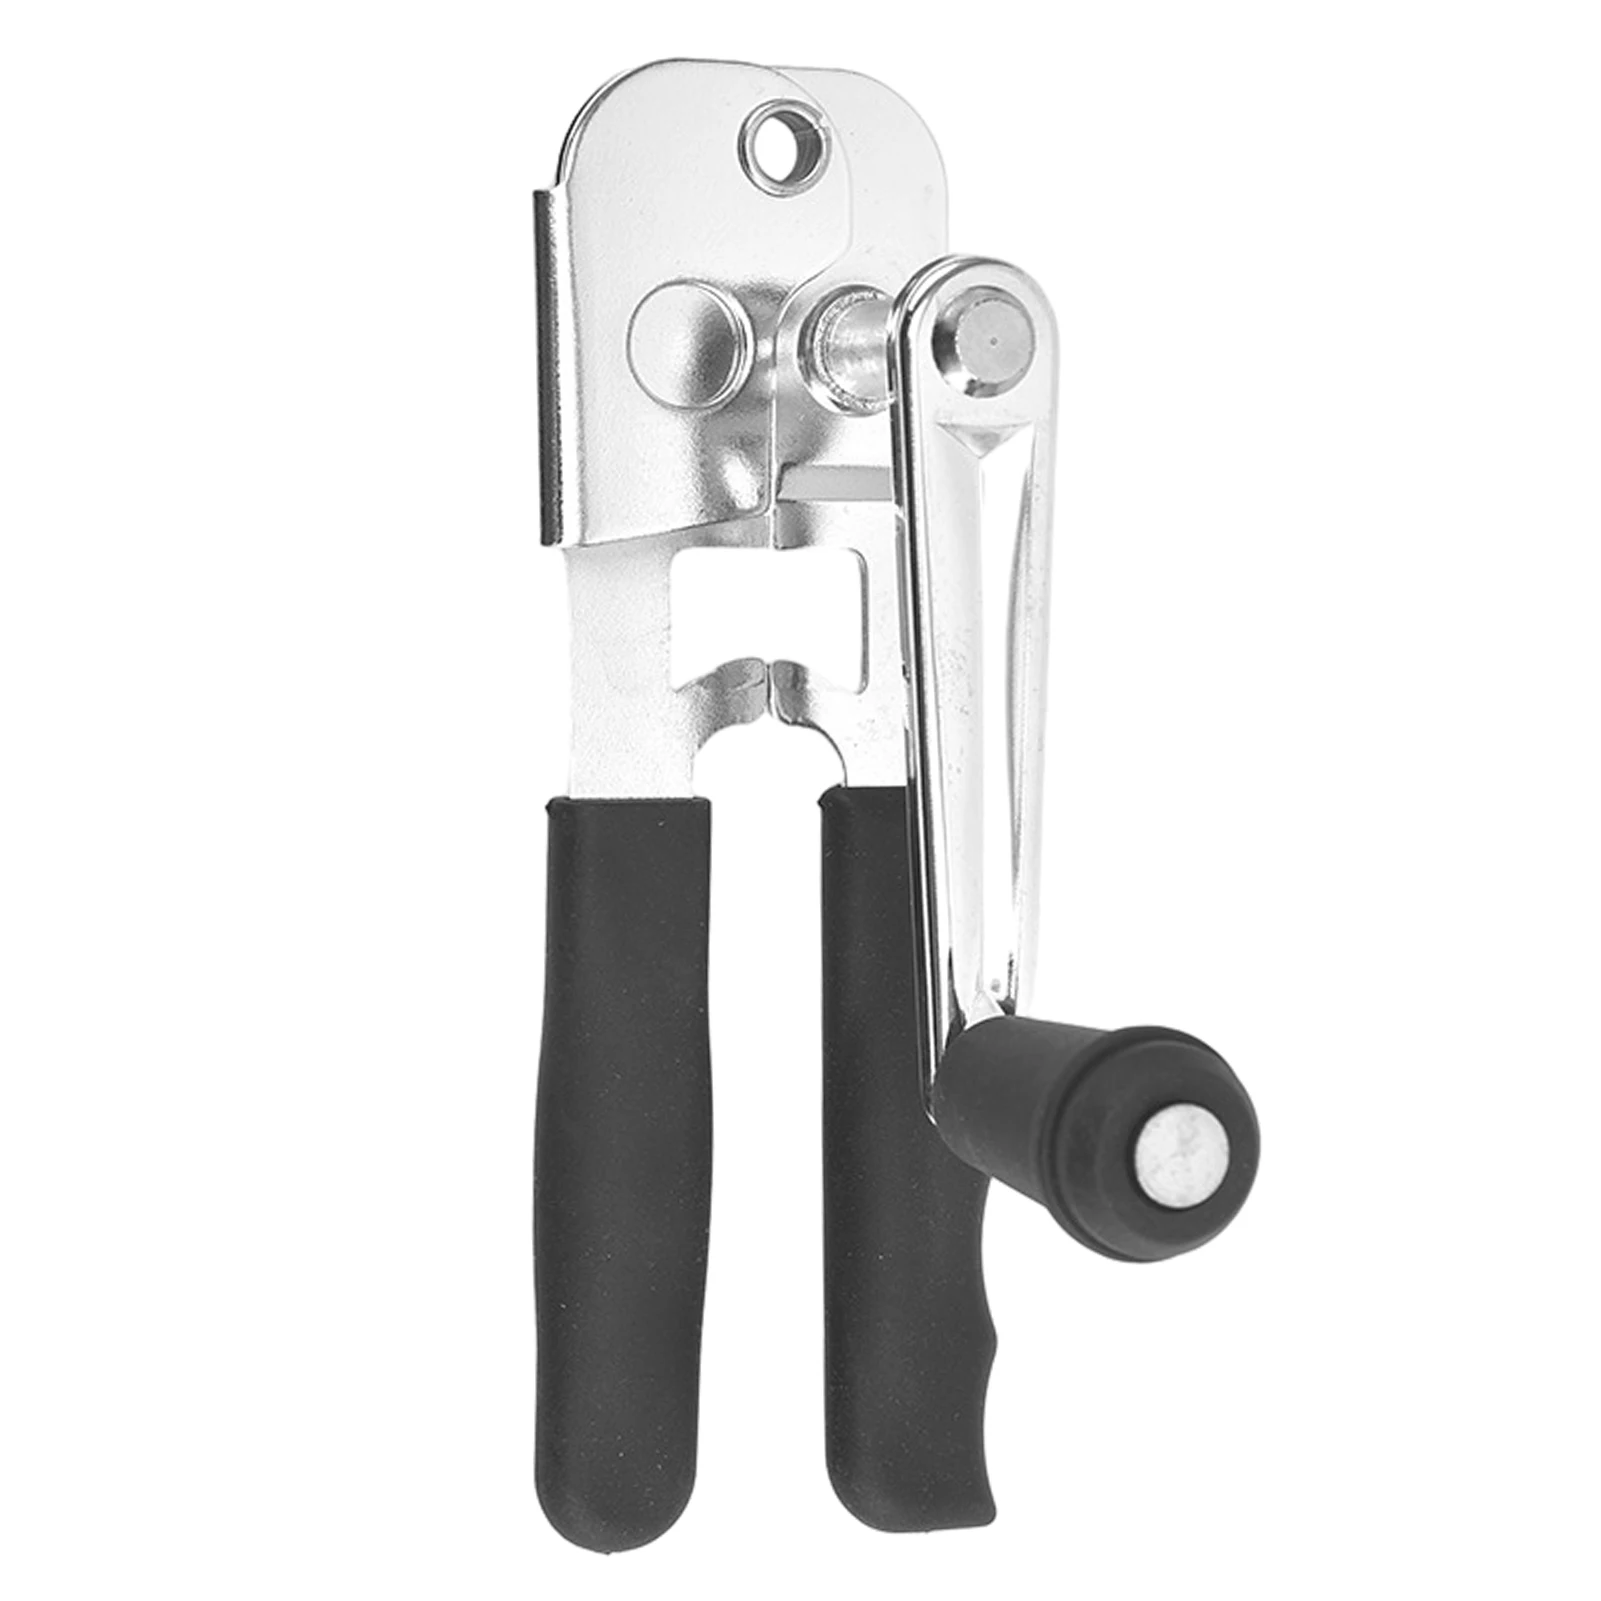 

For Kitchen Can Opener Home Useful Universal Comfortable Wine Drink Manual Tool Commercial Knob Heavy Duty Non Slip Hand Crank